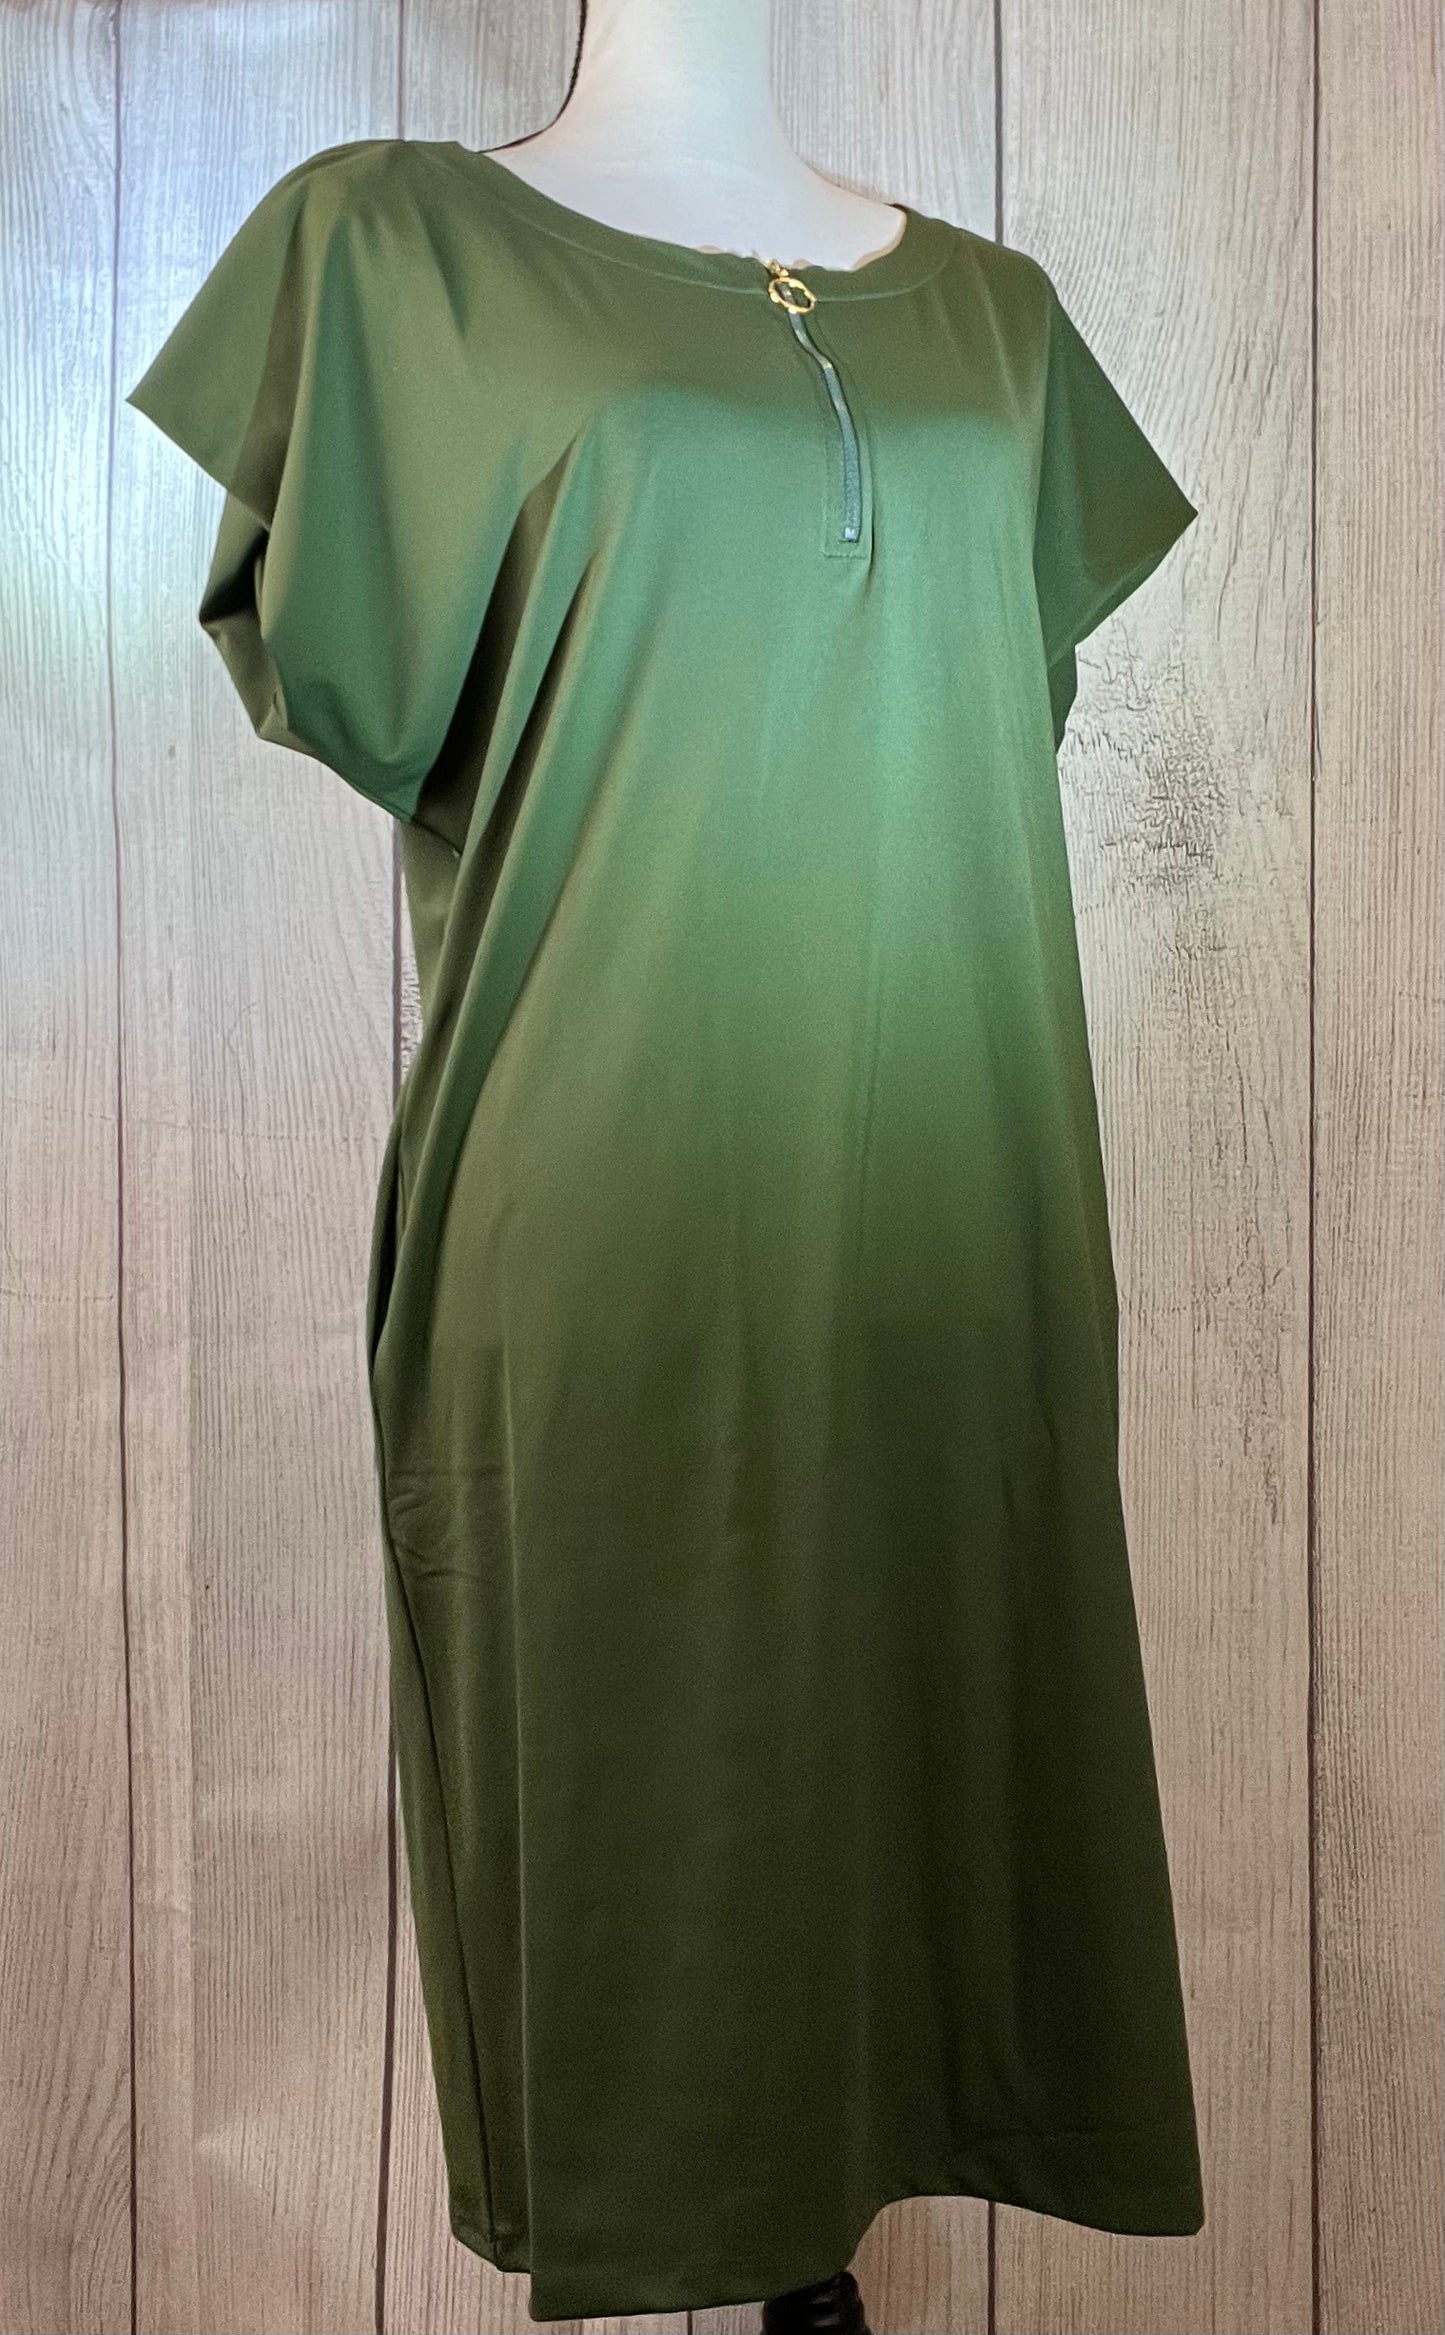 Womens Easy UPF 50 Sun Dress with Convertible Sleeves and Pockets